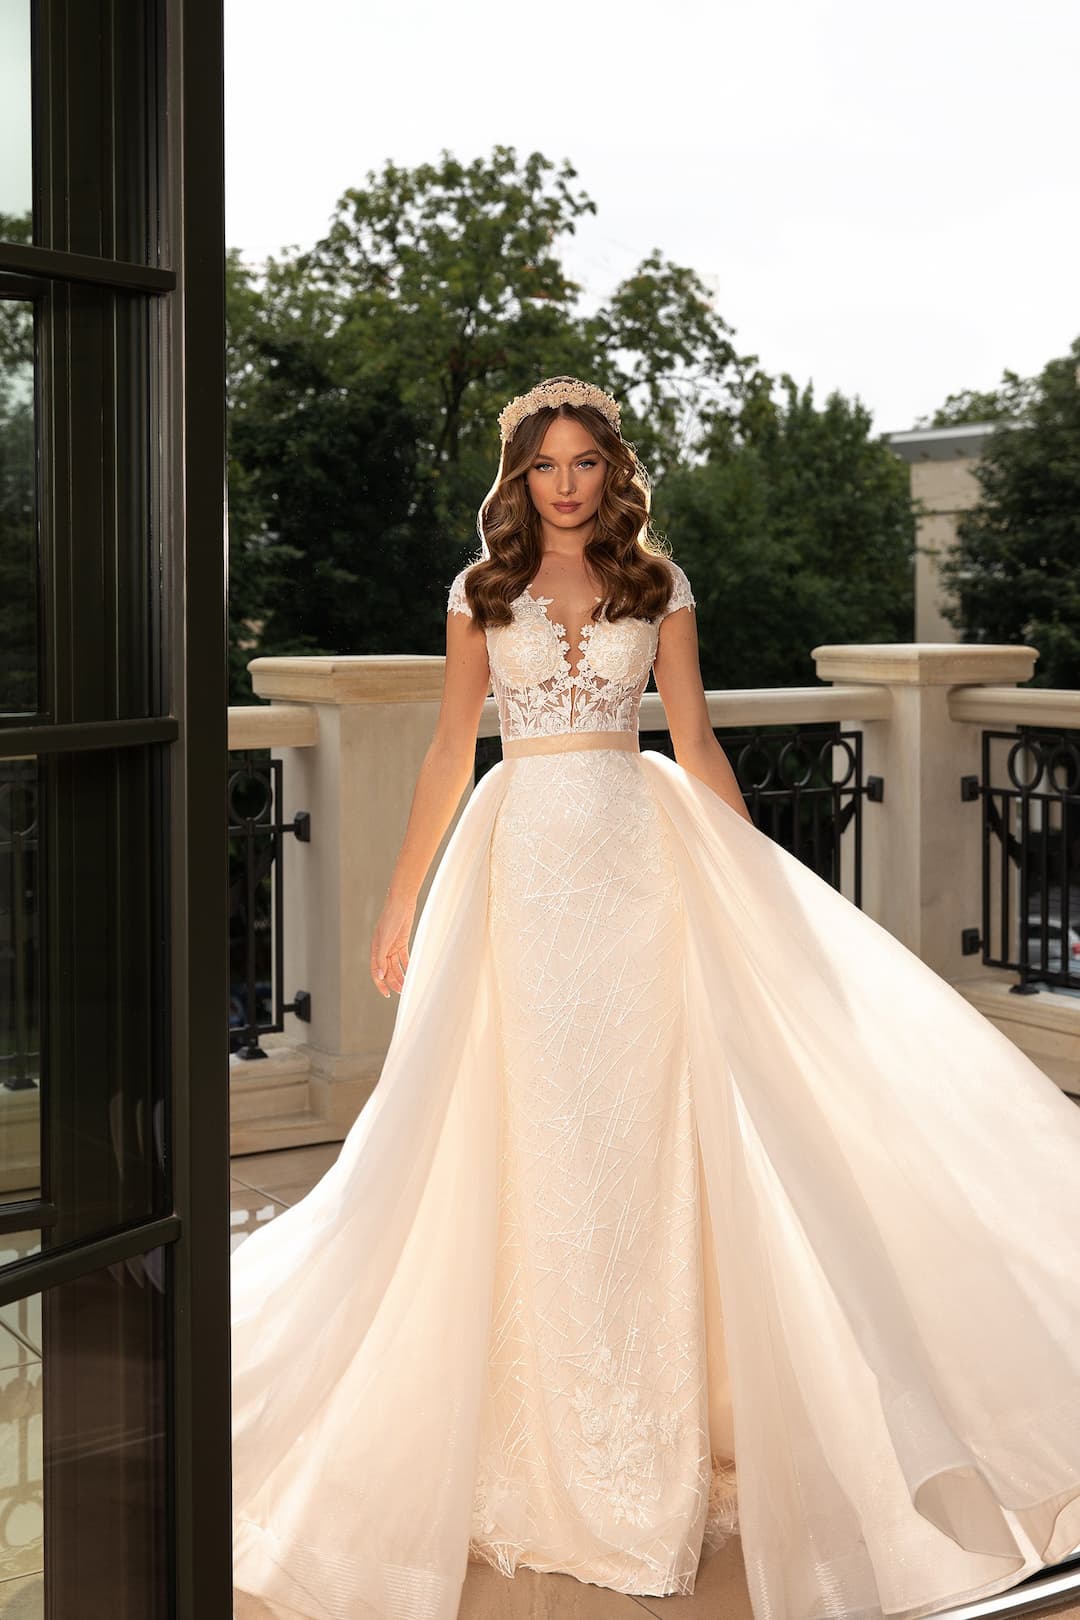 Wedding dress 5331 Product for Sale at NY City Bride